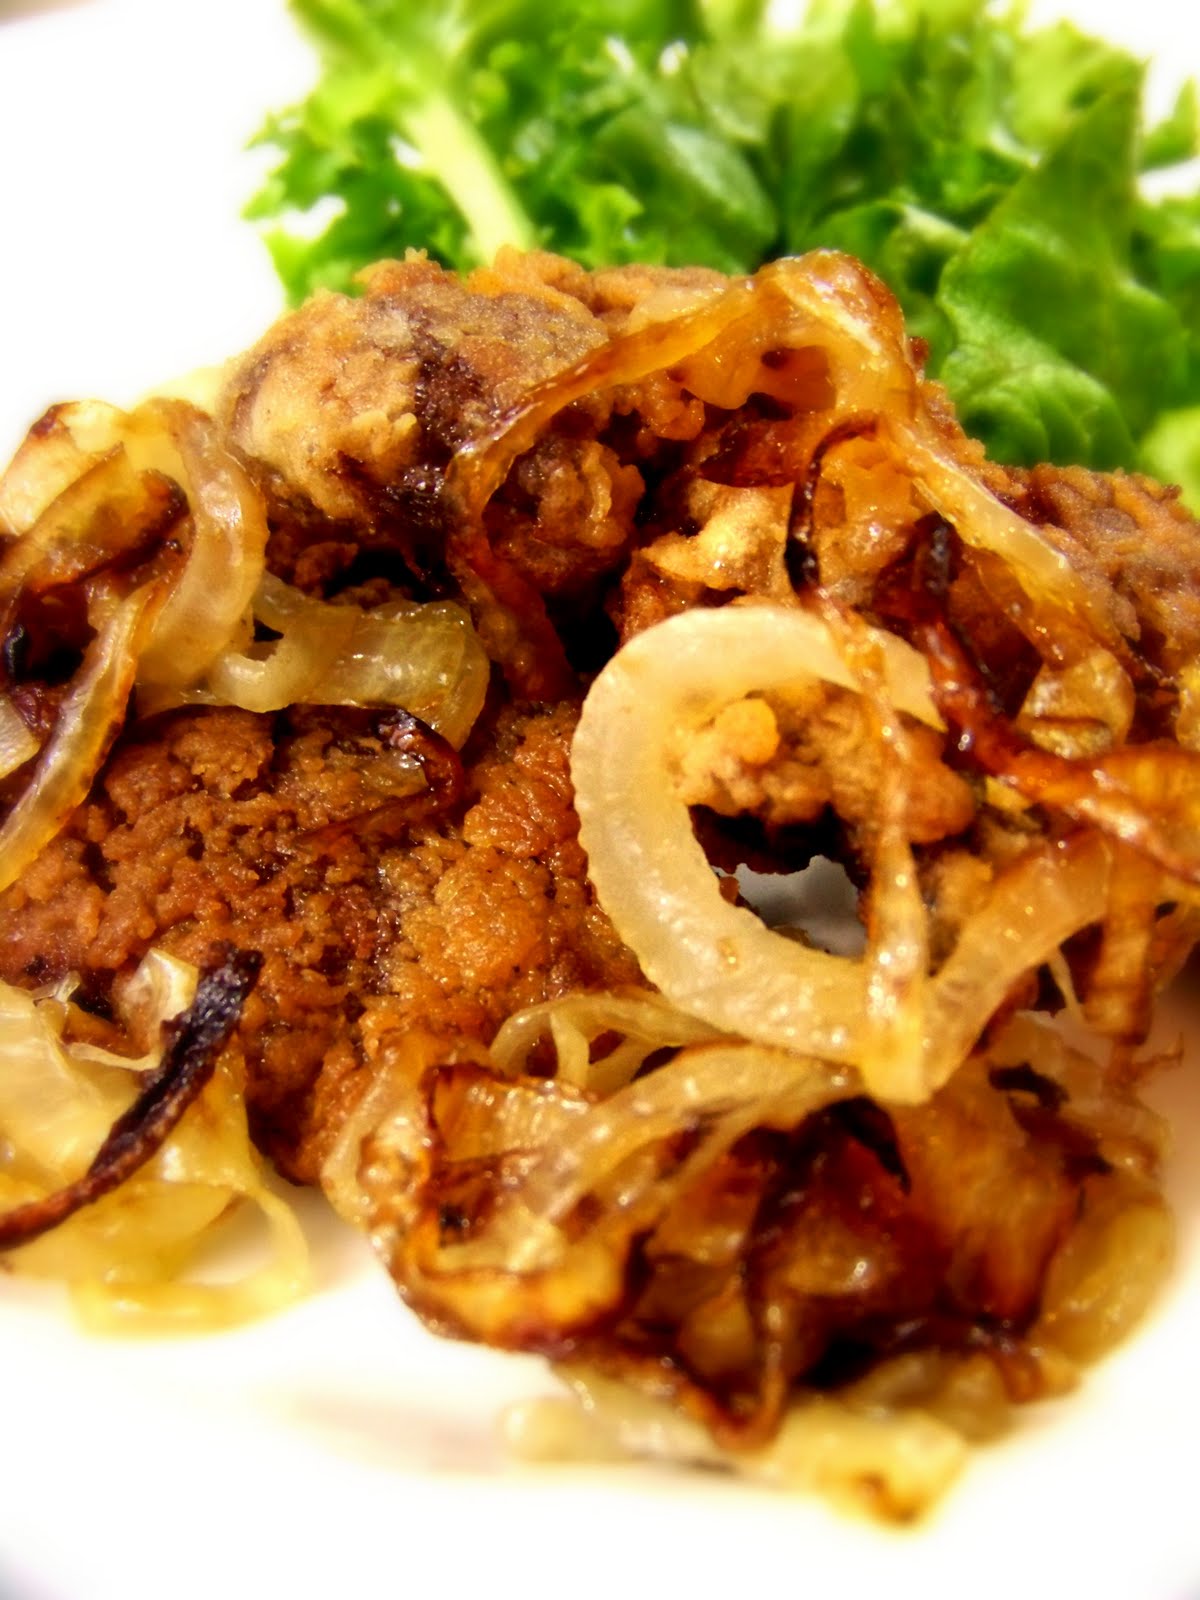 Crispy Fried Chicken Livers with Caramalized Onions | Community Chickens